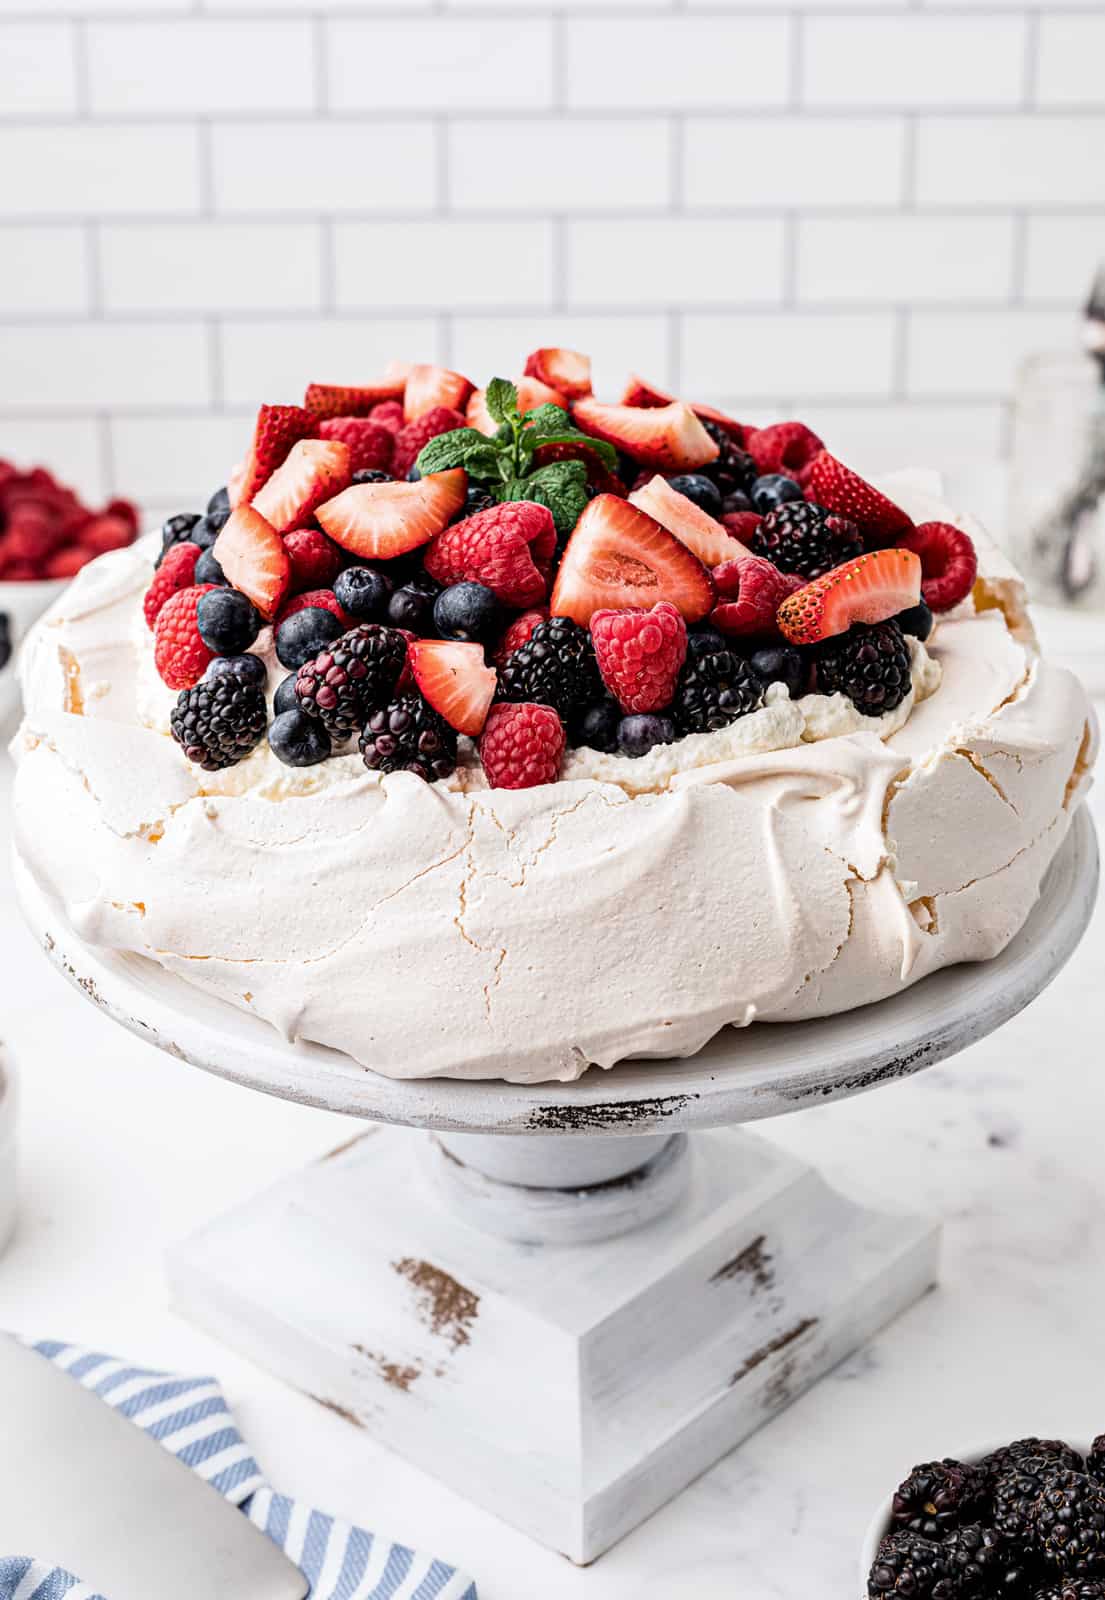 Finished Pavlova Recipe topped with whipped cream and mixed berries